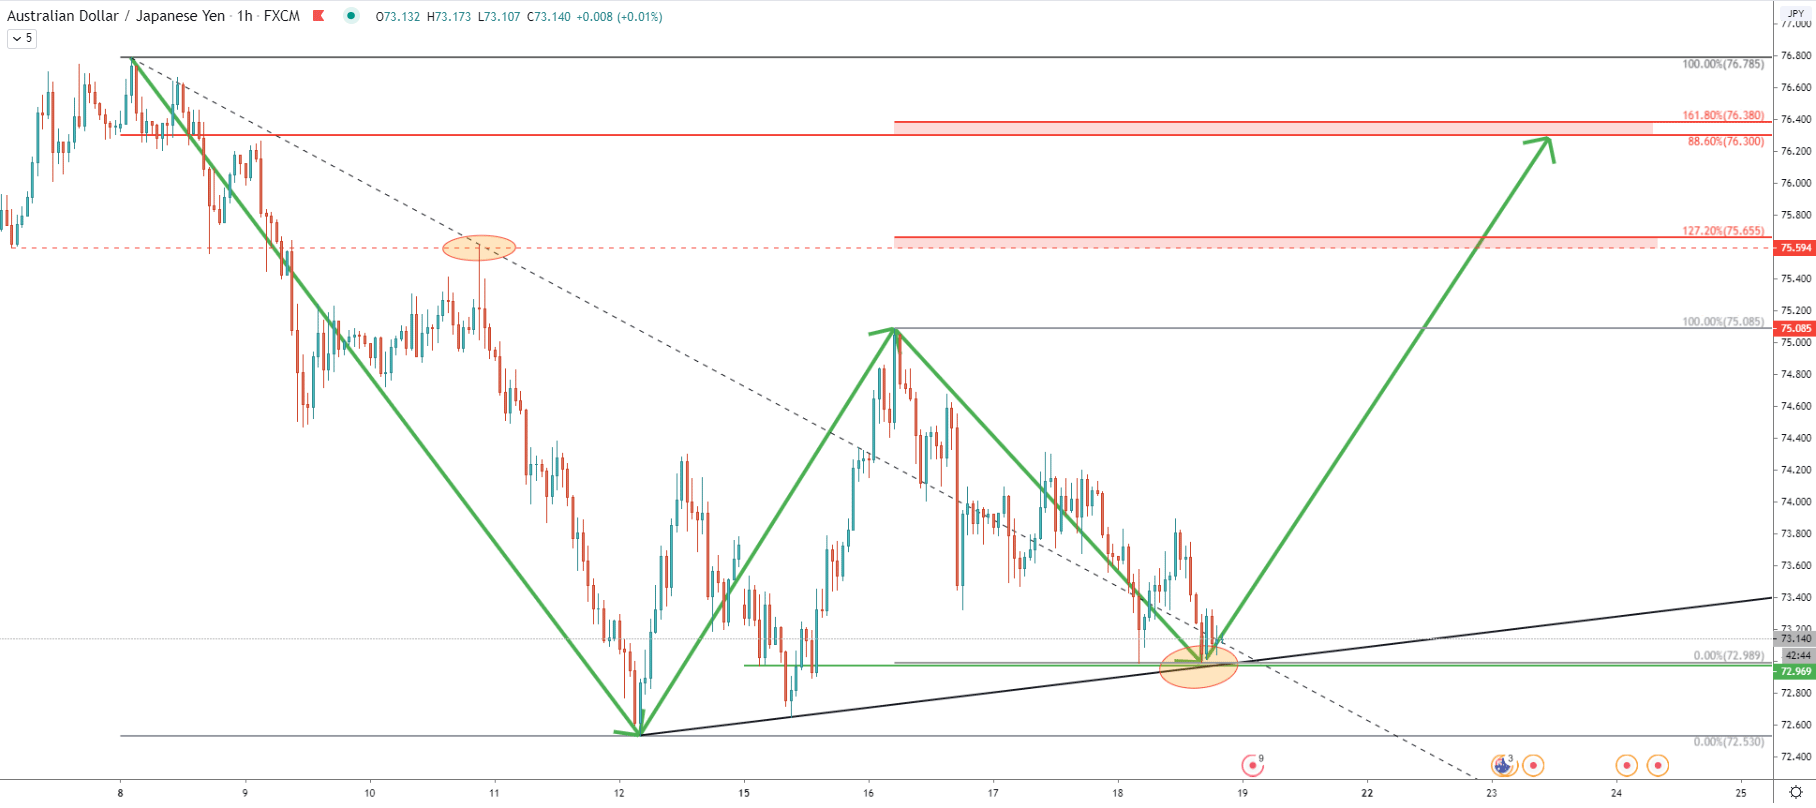 AUD/JPY 1-Hour Technical Analysis 18 June 2020